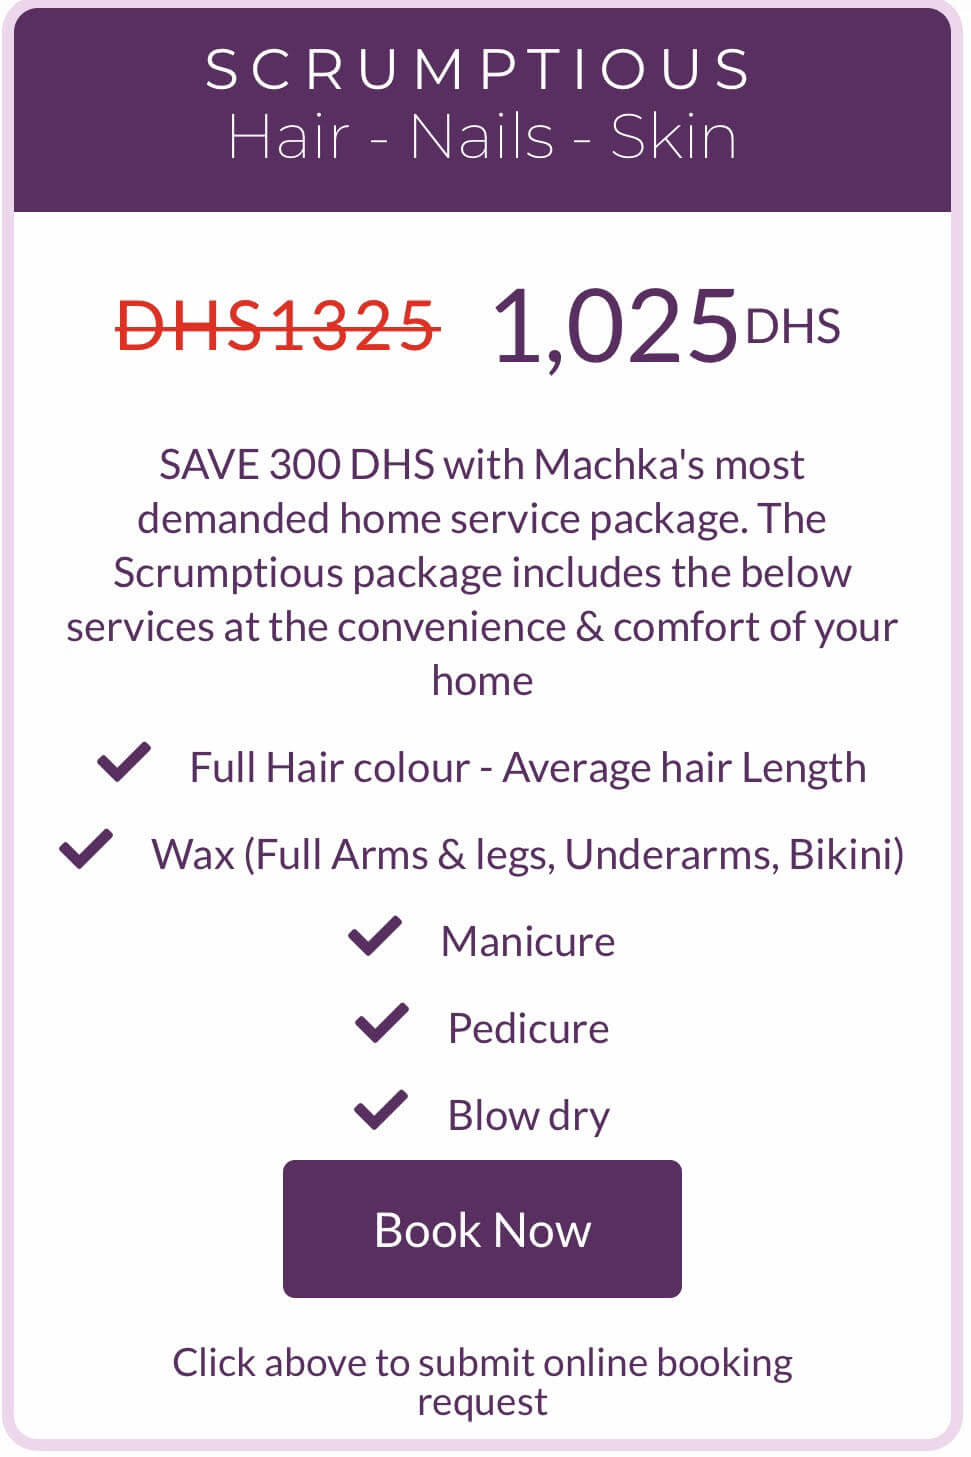 Dubai Machka Beauty & fitness services at home - Hair Salon services - Home services hair colour keratin extensions Brazilian blowout nails massage slimming personal training fitness and more - Package offer 4